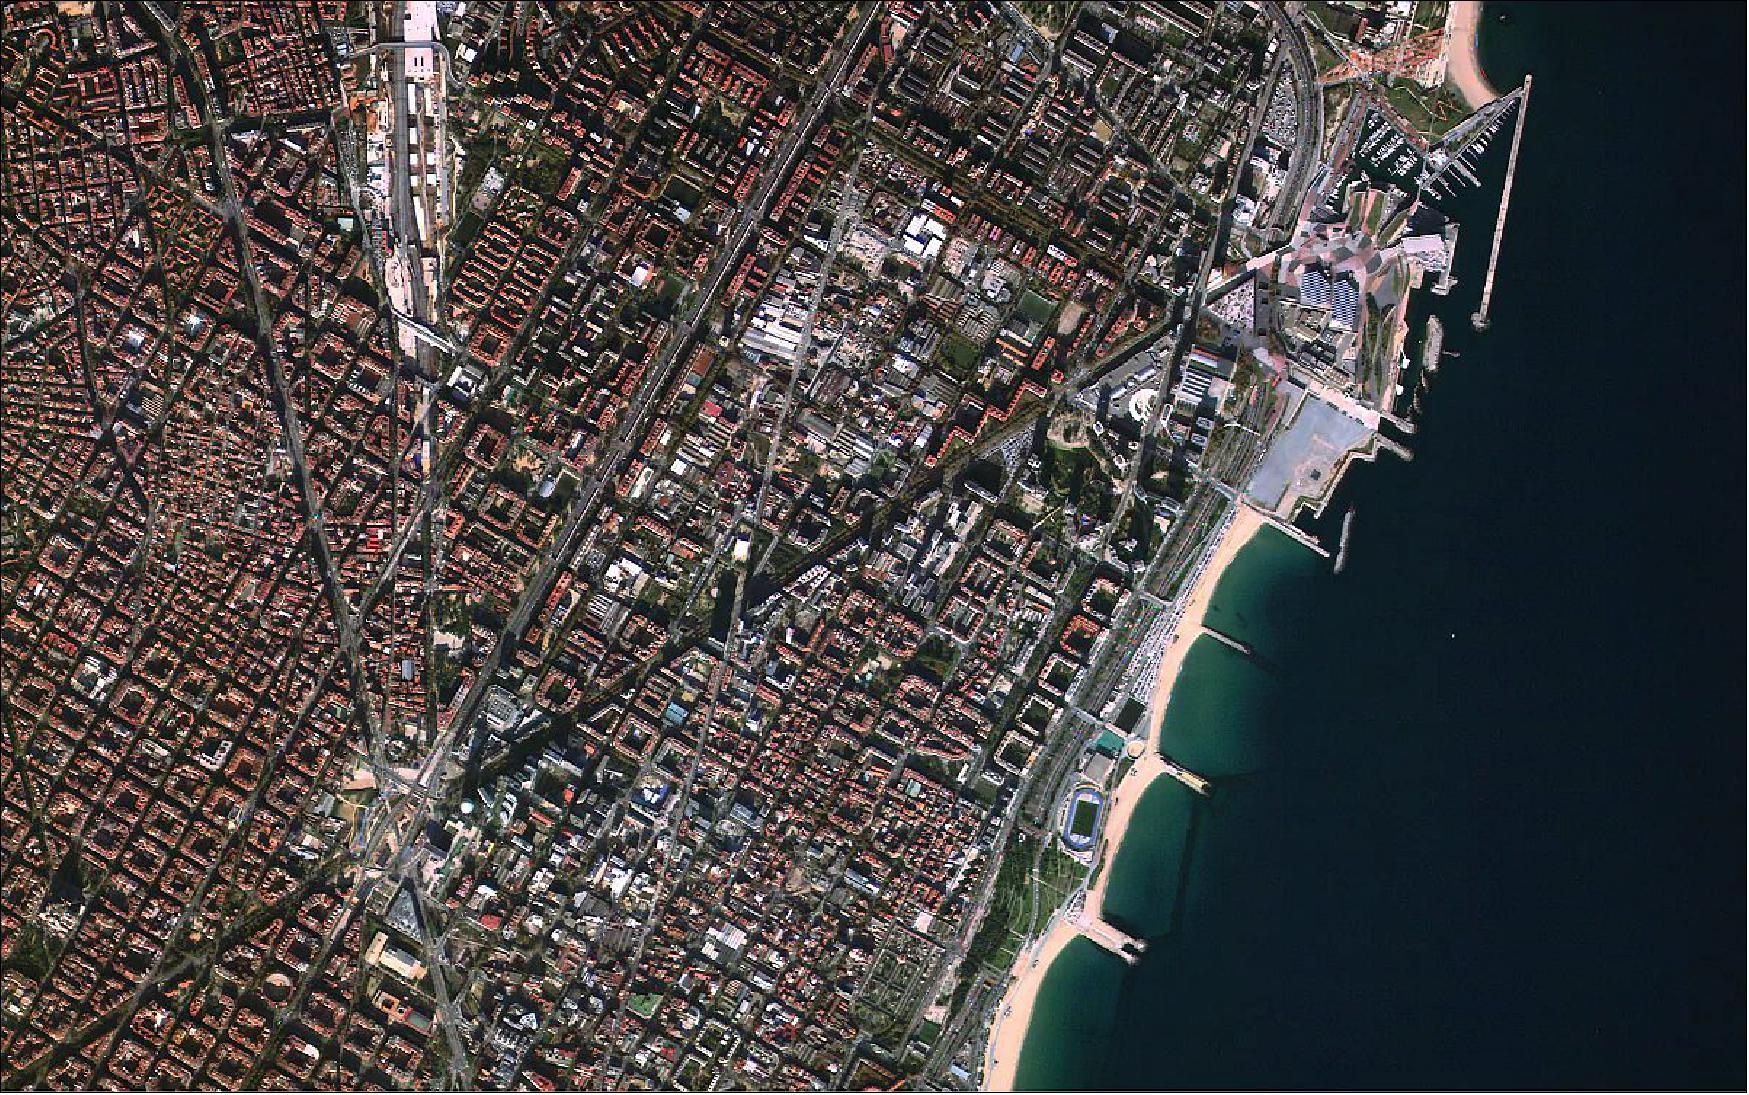 Figure 15: A sample satellite image of the city of Barcelona in Spain from the Argentine company Satellogic (image credit:Satellogic)